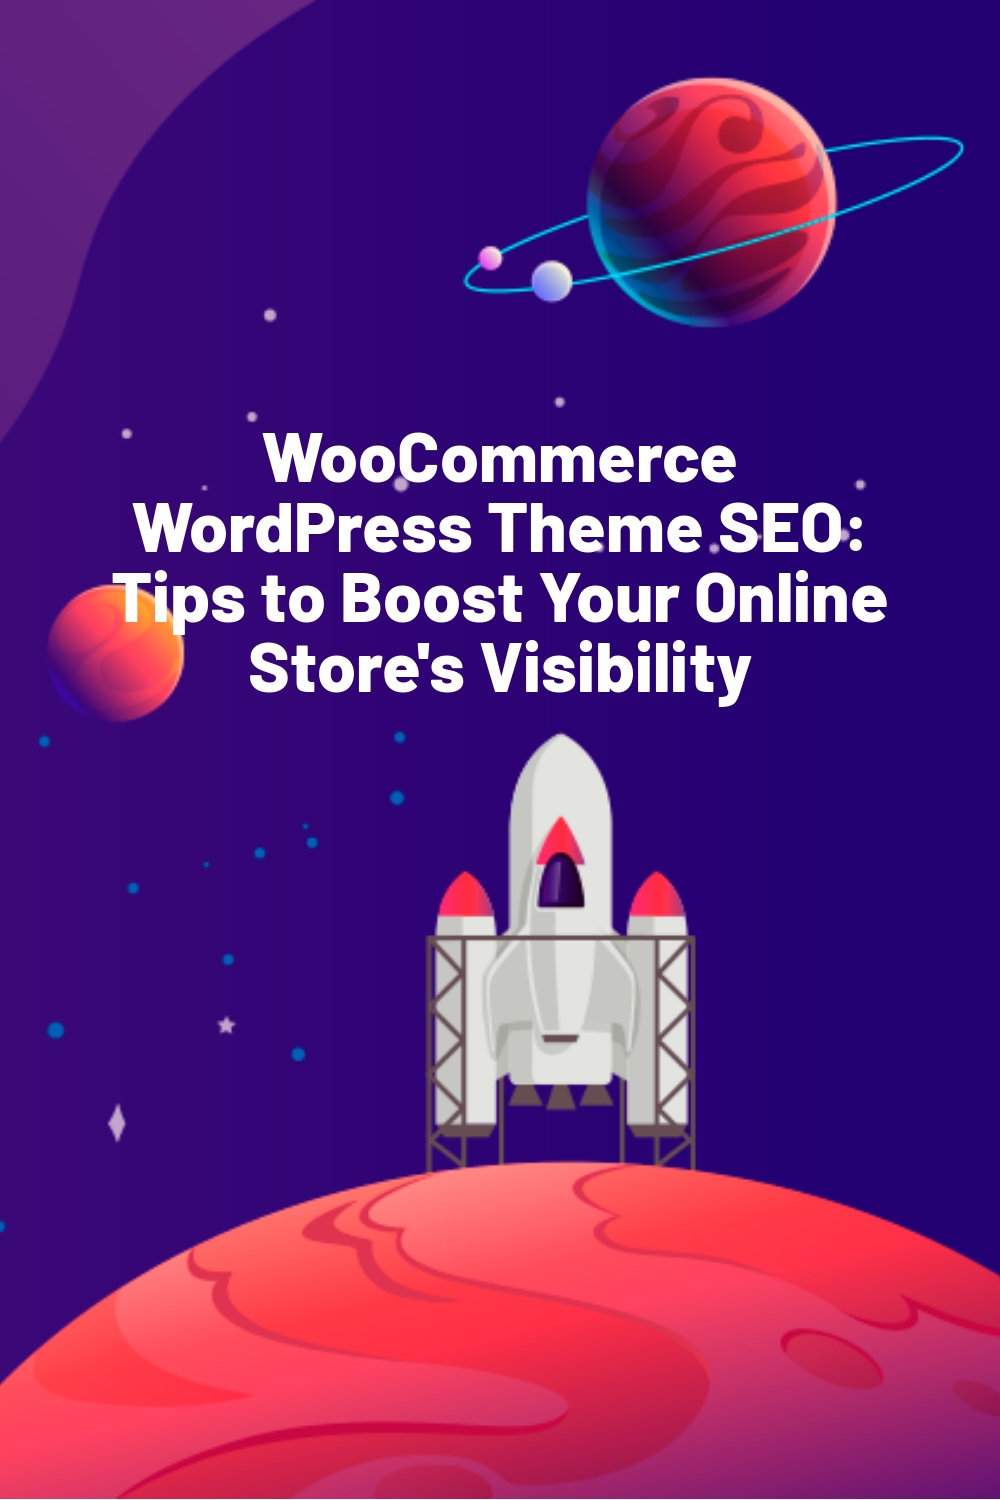 WooCommerce WordPress Theme SEO: Tips to Boost Your Online Store’s Visibility